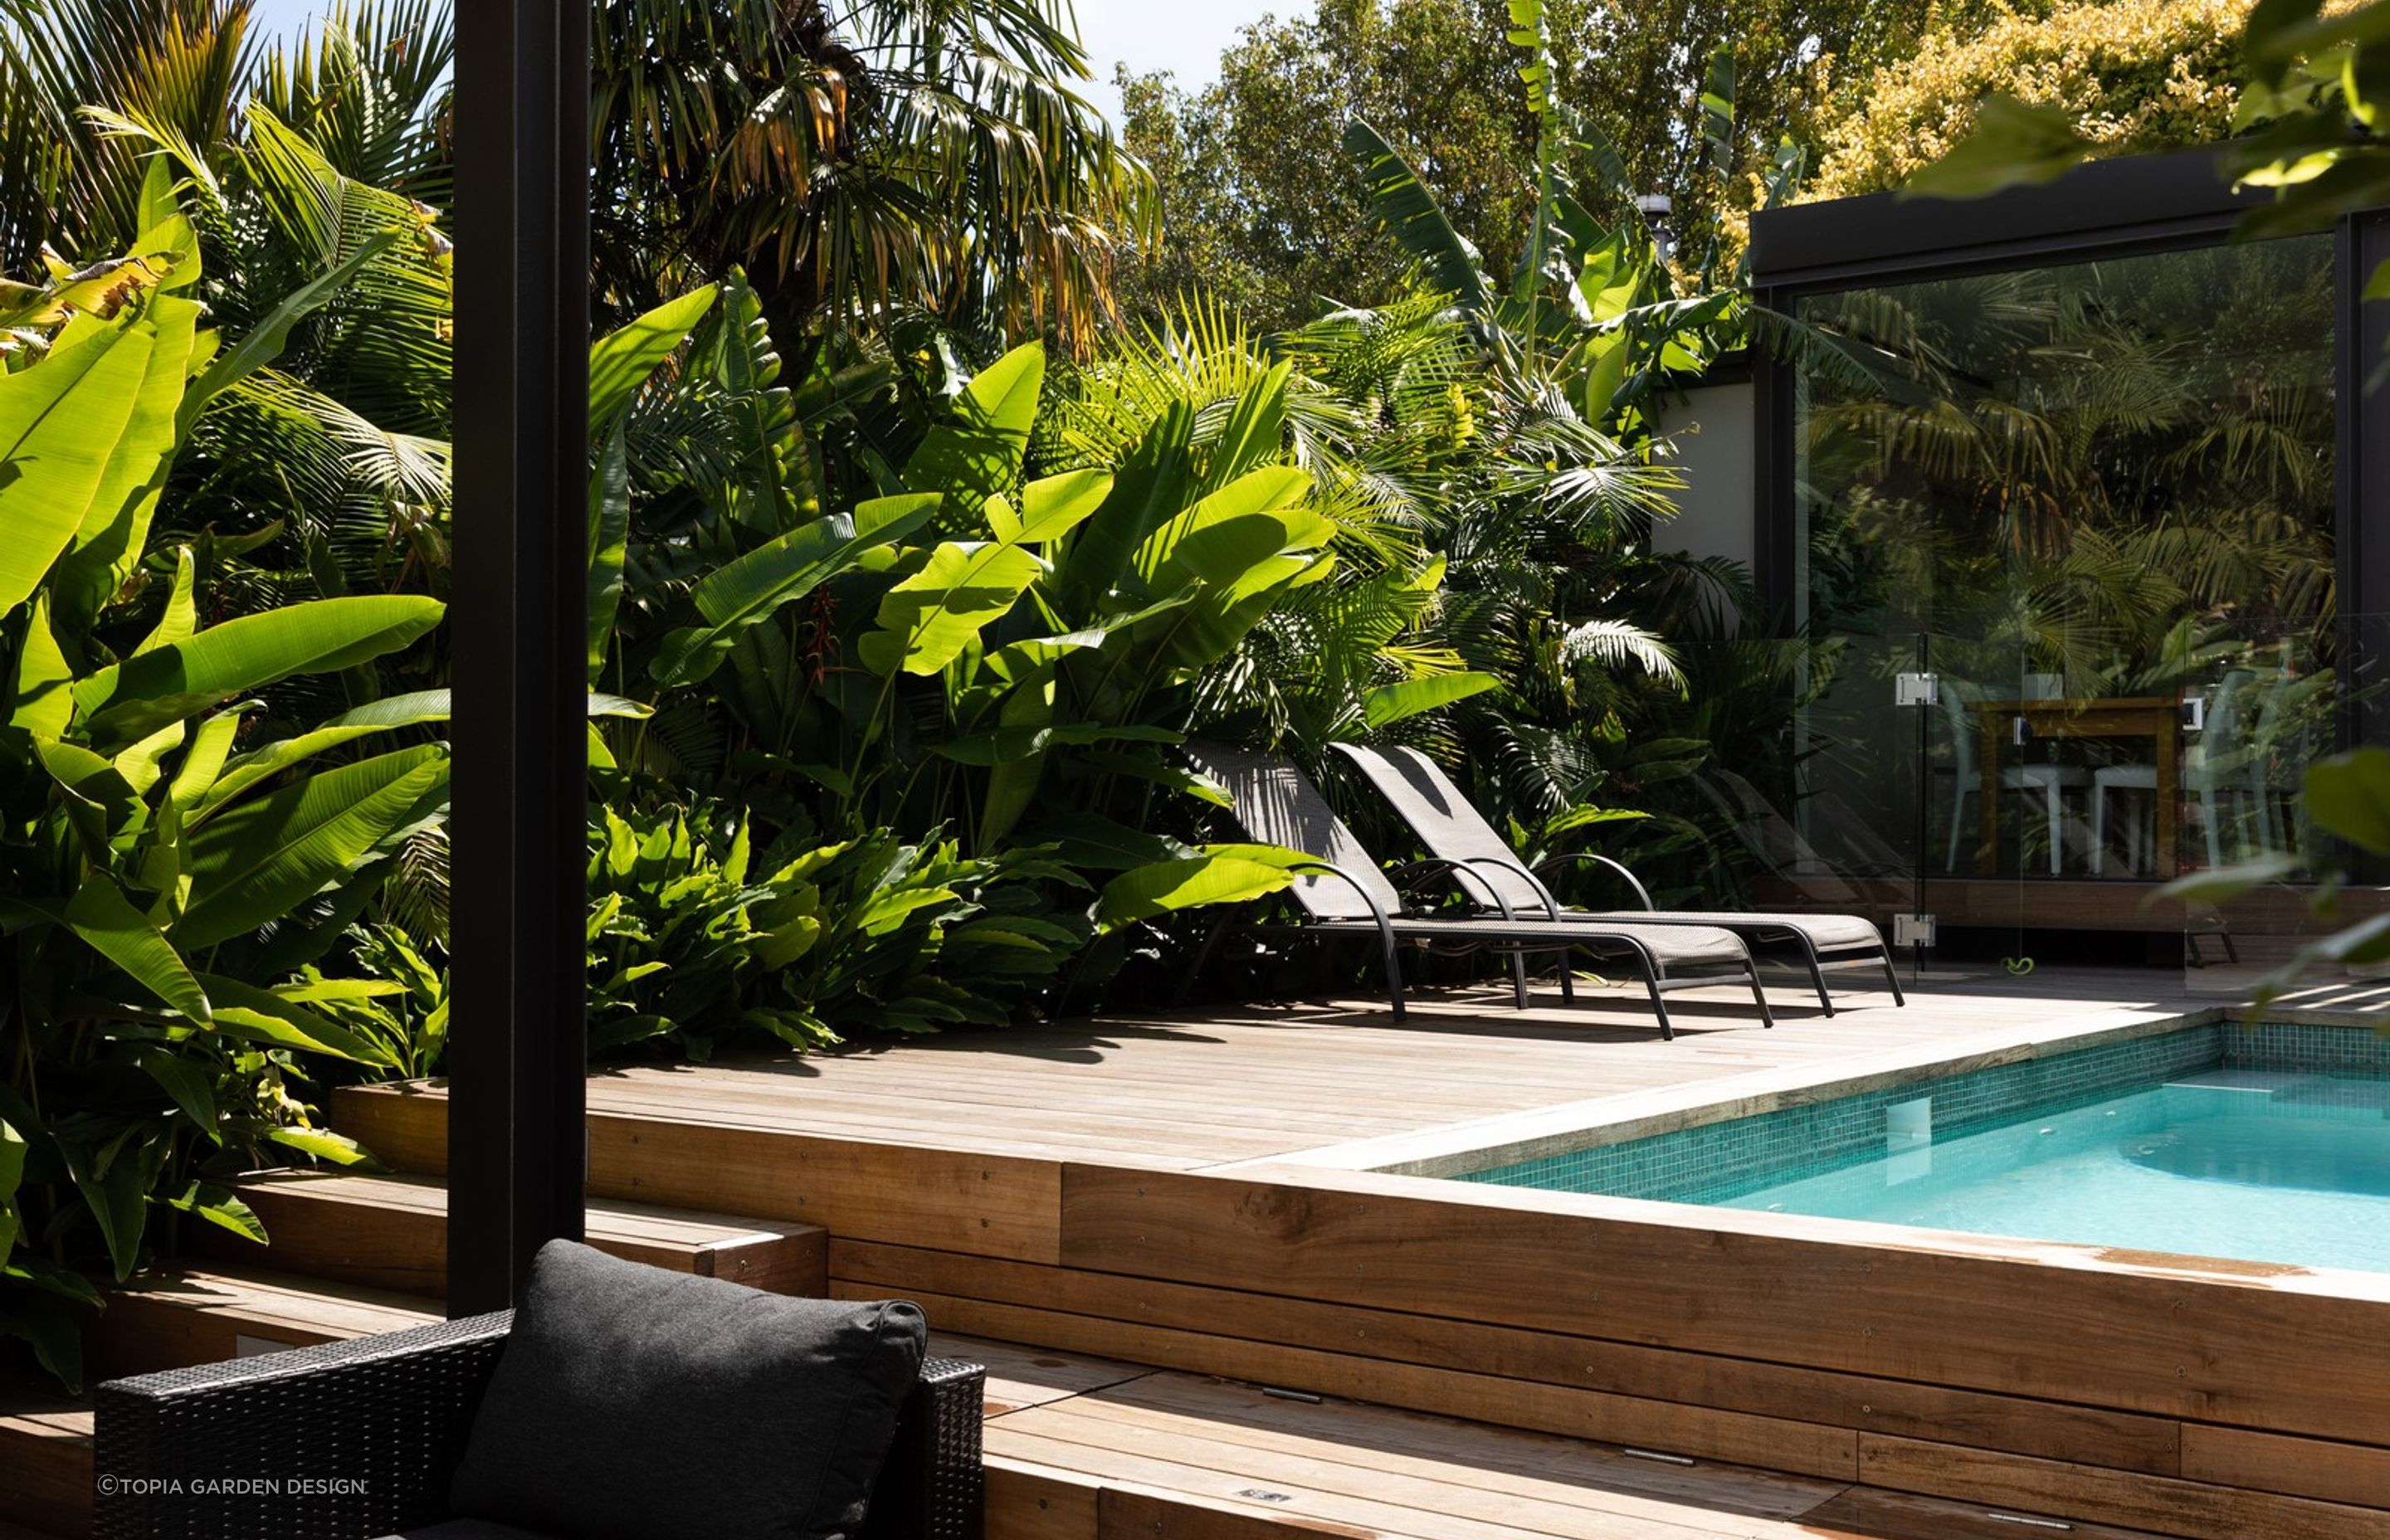 Picking plants that will prosper in your climate is fundamental to success, seen here in this stylish outdoor space in sub-tropical Auckland.